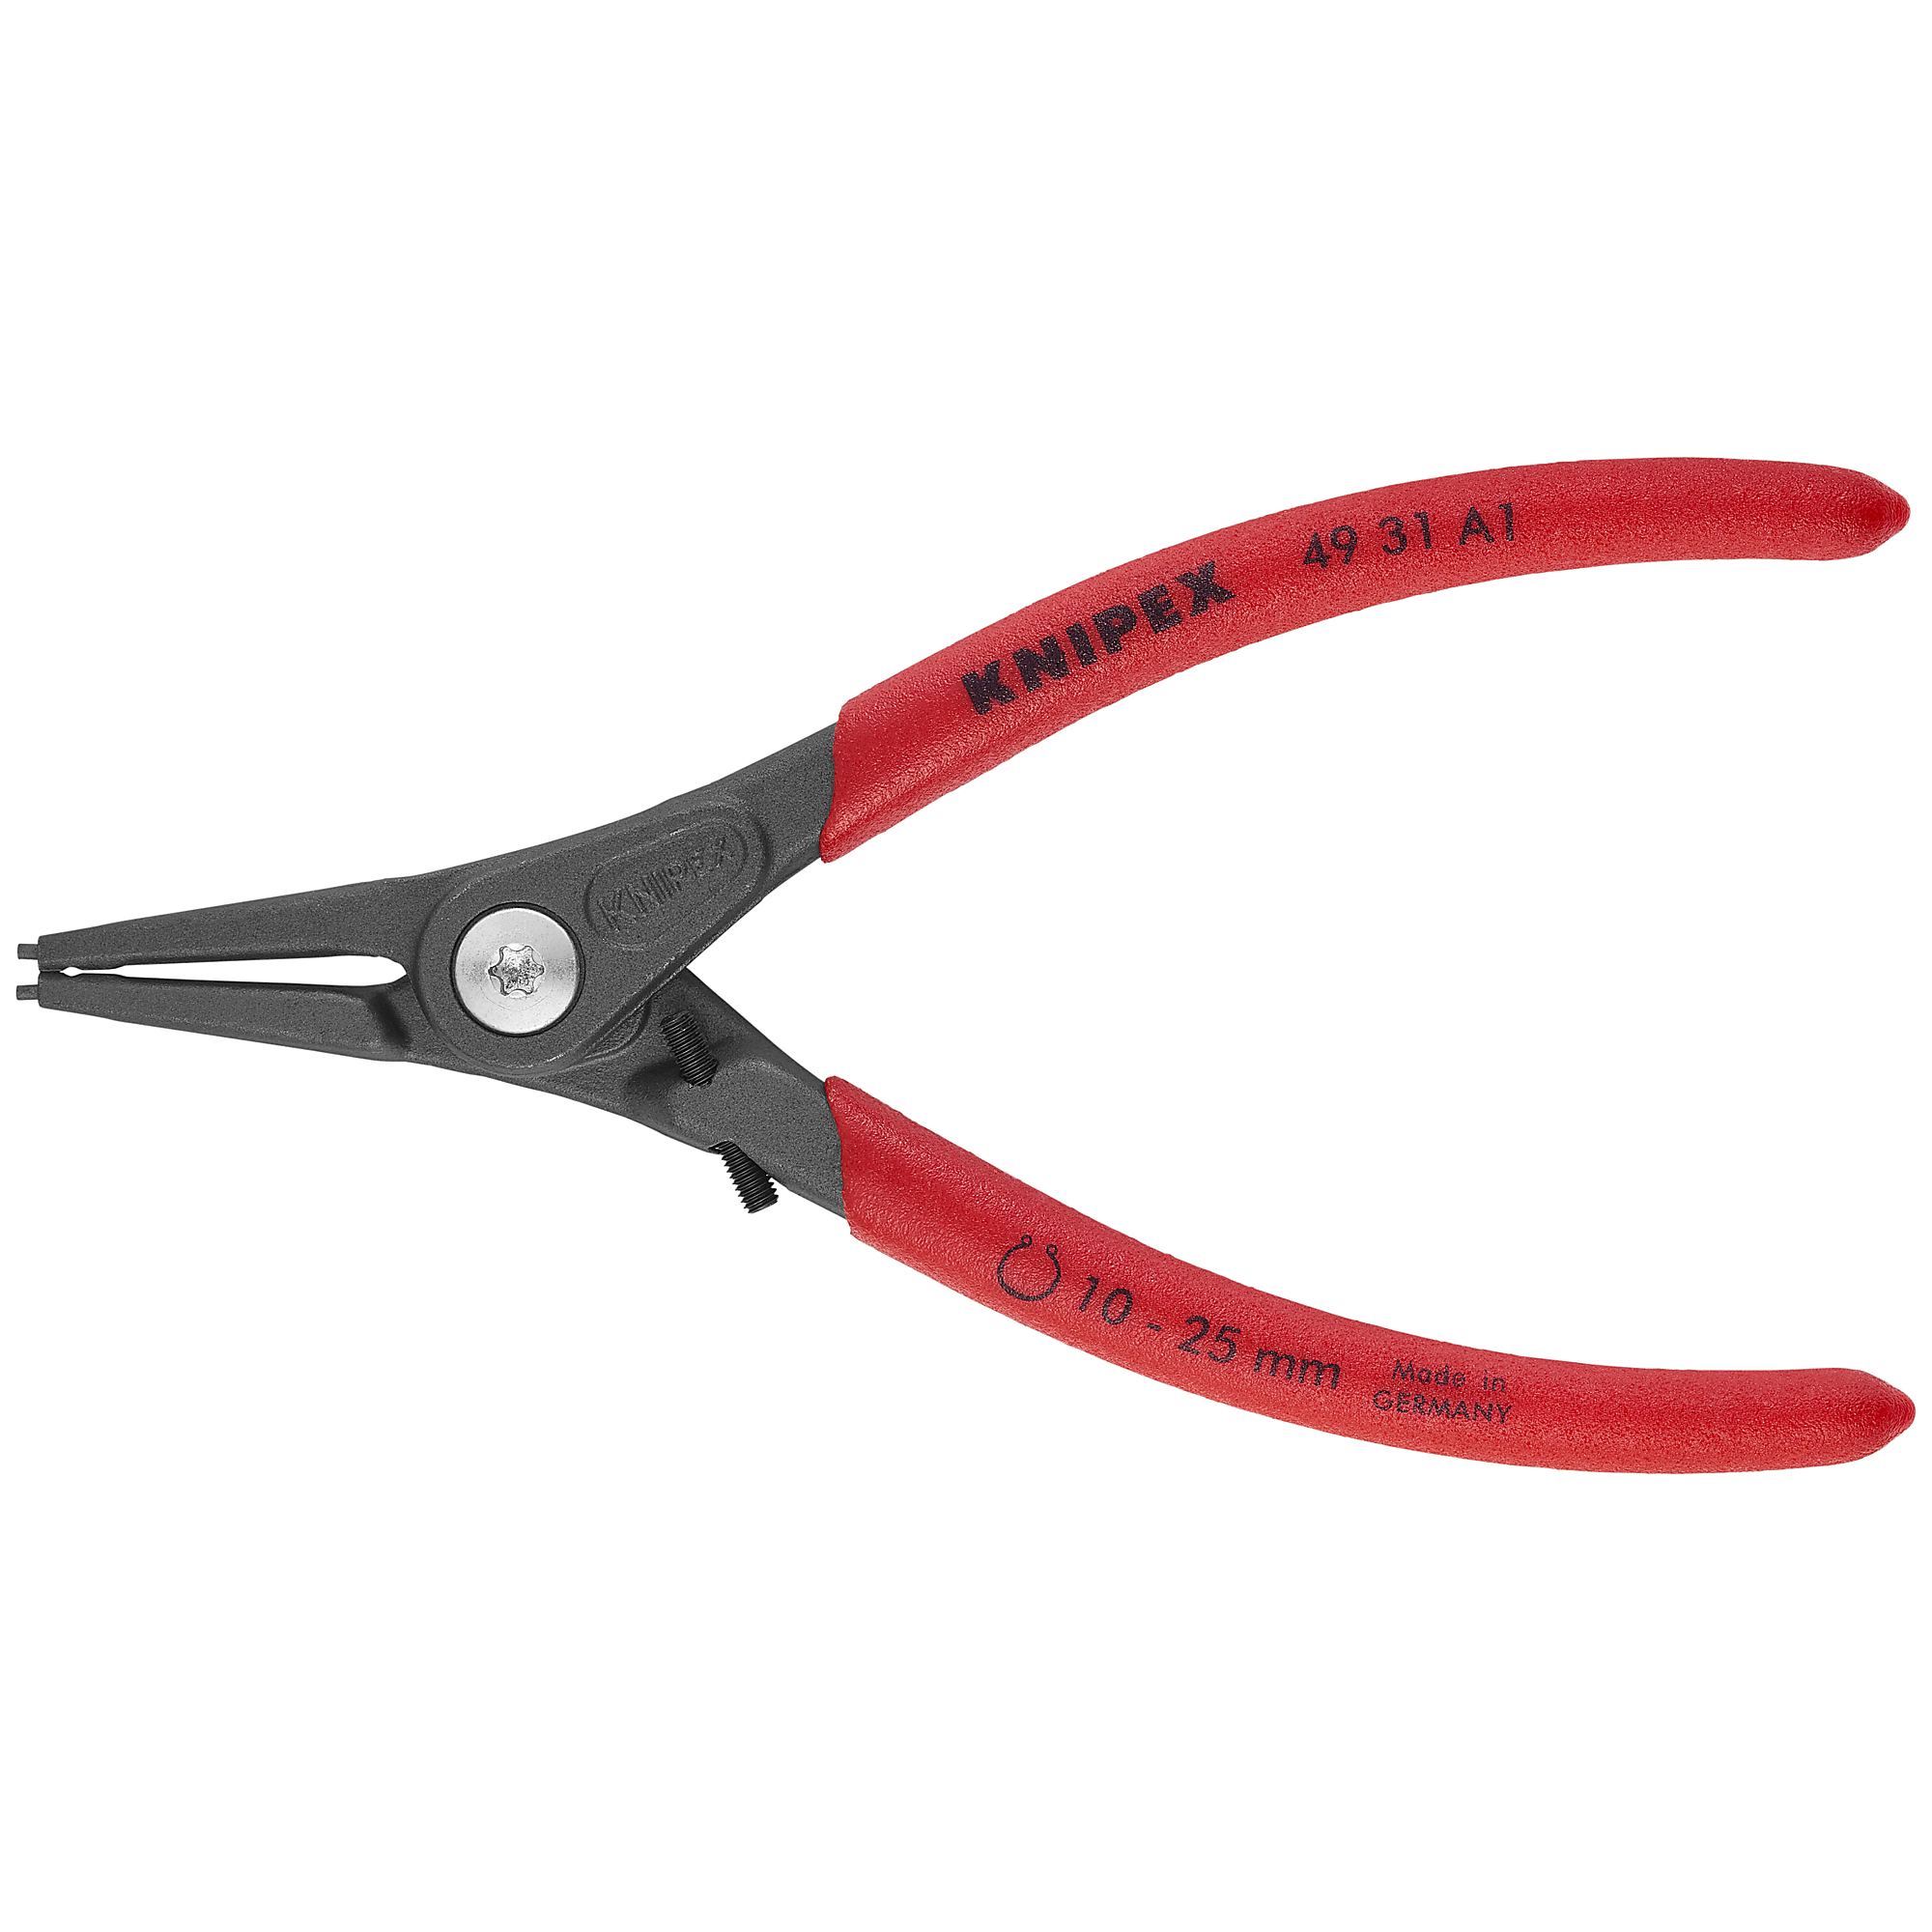 KNIPEX, Ext Prec. Snap Ring Plrs-Limiter, 3/64 tip, 5.5Inch, Pieces (qty.) 1 Material Steel, Model 49 31 A1